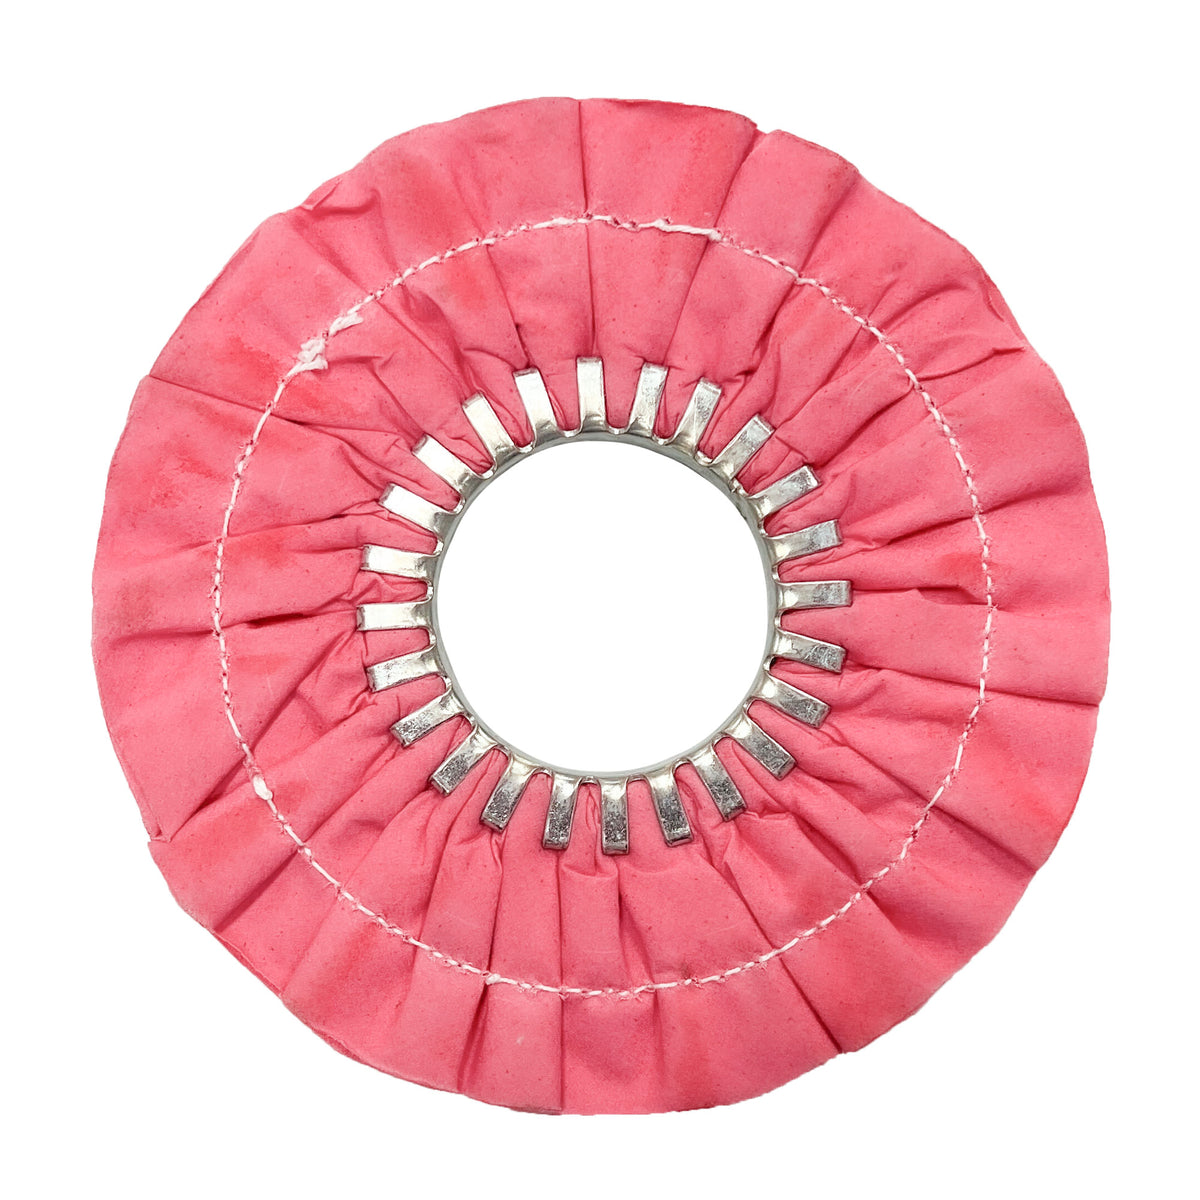 Renegade Products USA&#39;s pink 9&quot; stitched airway buffing wheels, providing excellent polishing and buffing performance for a flawless finish